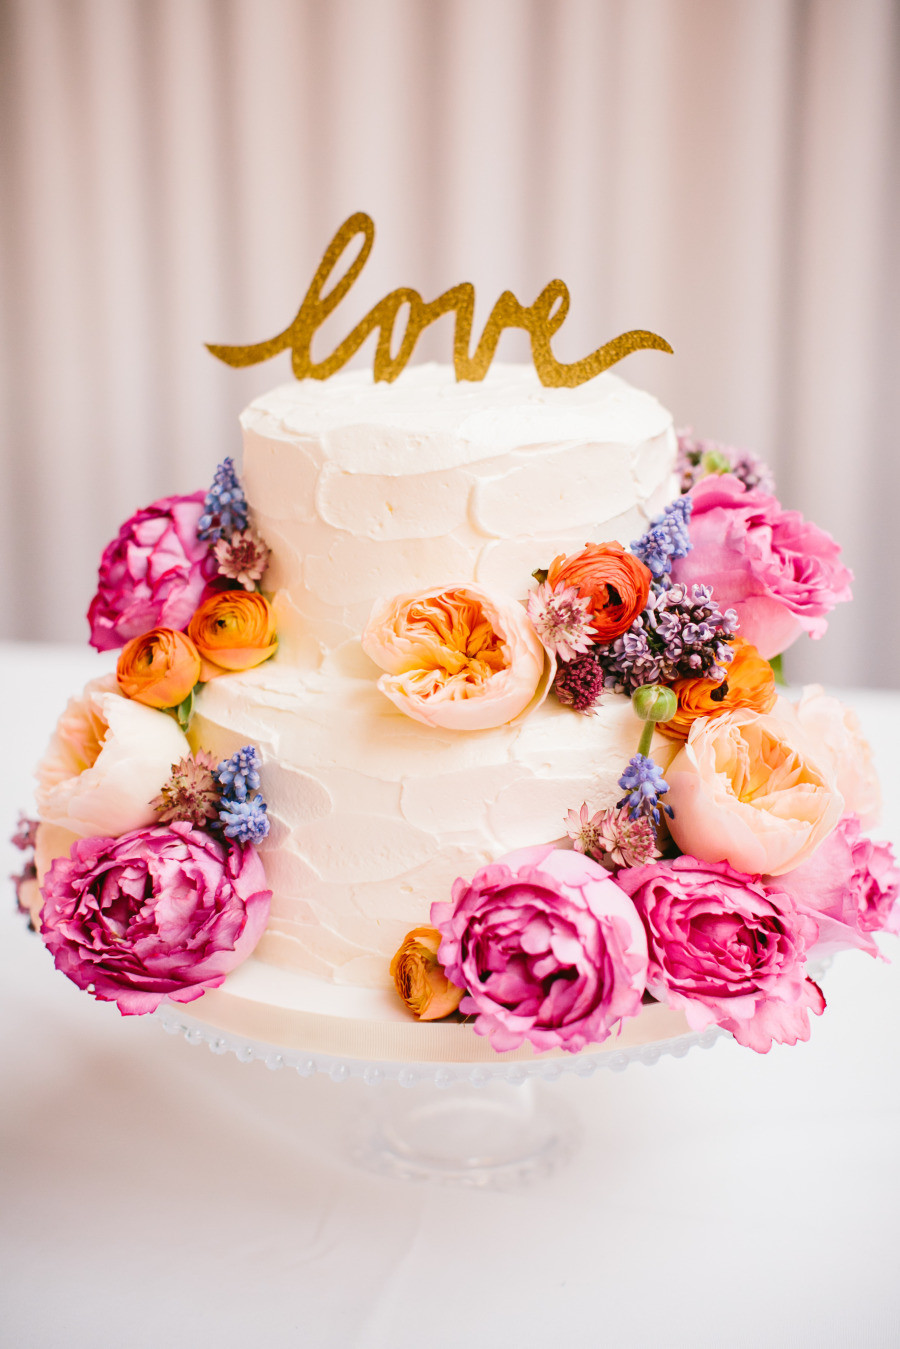 Wedding Cake Ideas For Summer
 20 Impeccable Wedding cake ideas for summer